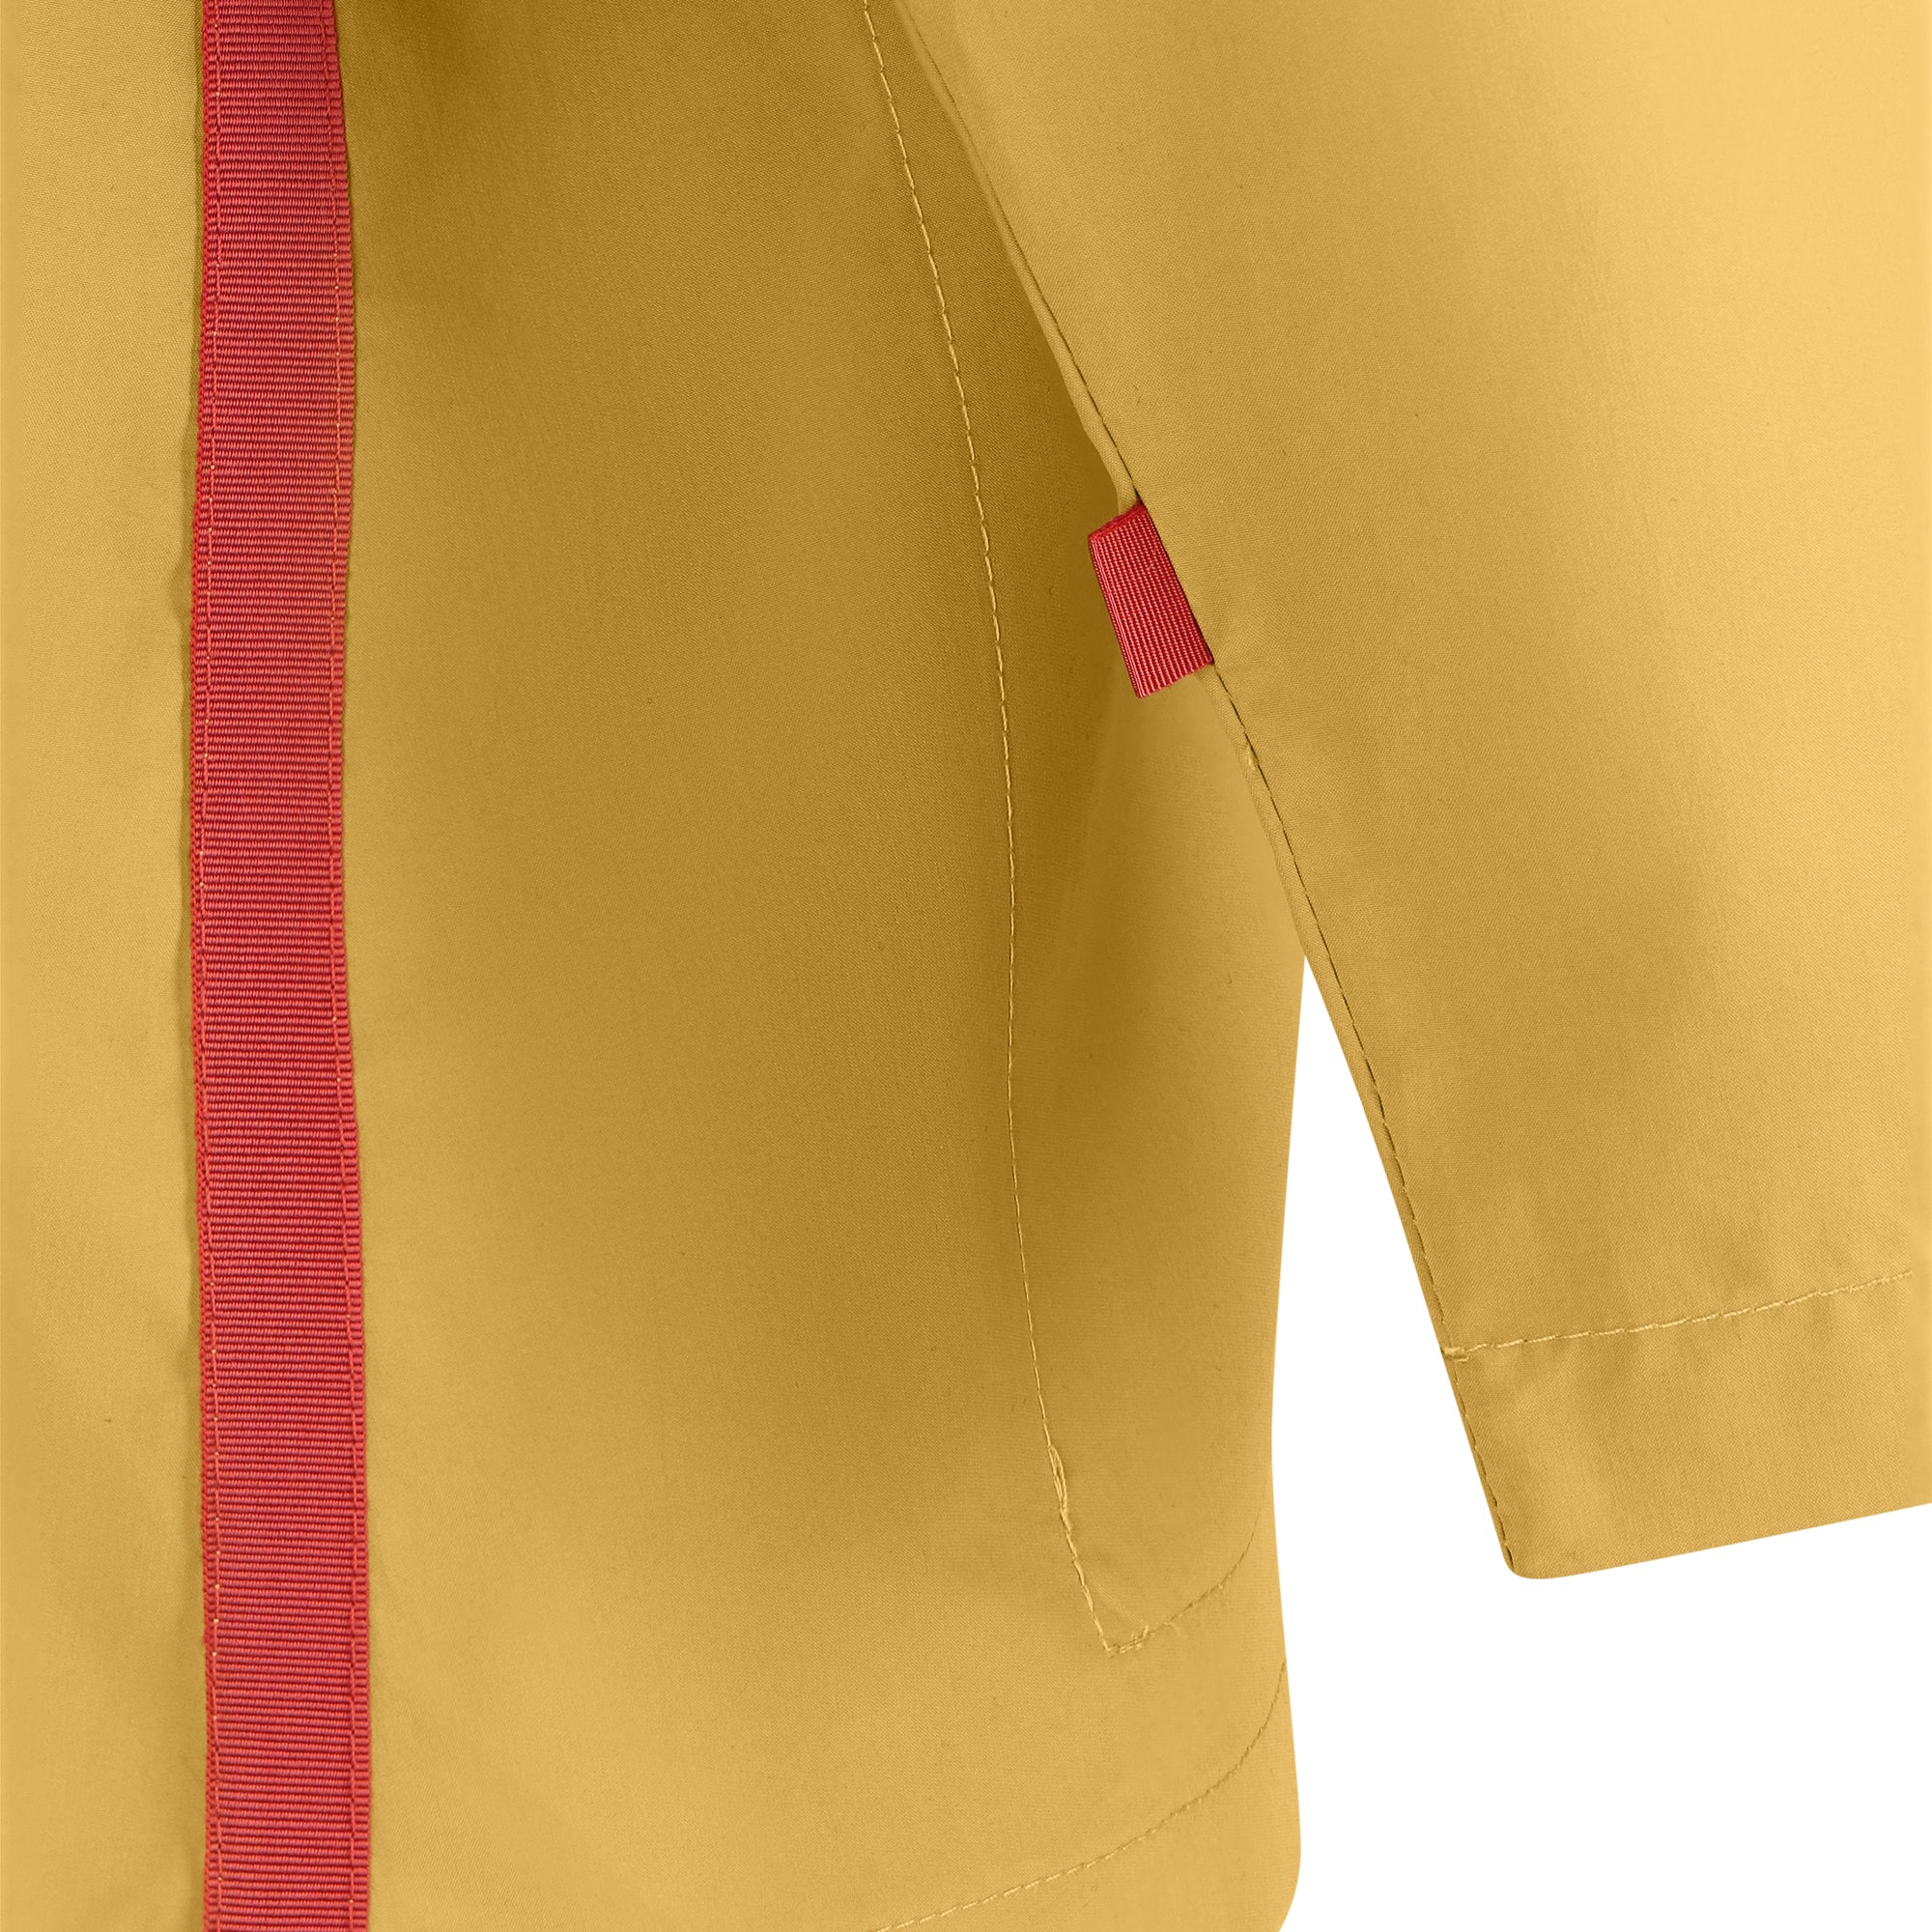 Bise raincoat - Curry color - sleeve detail